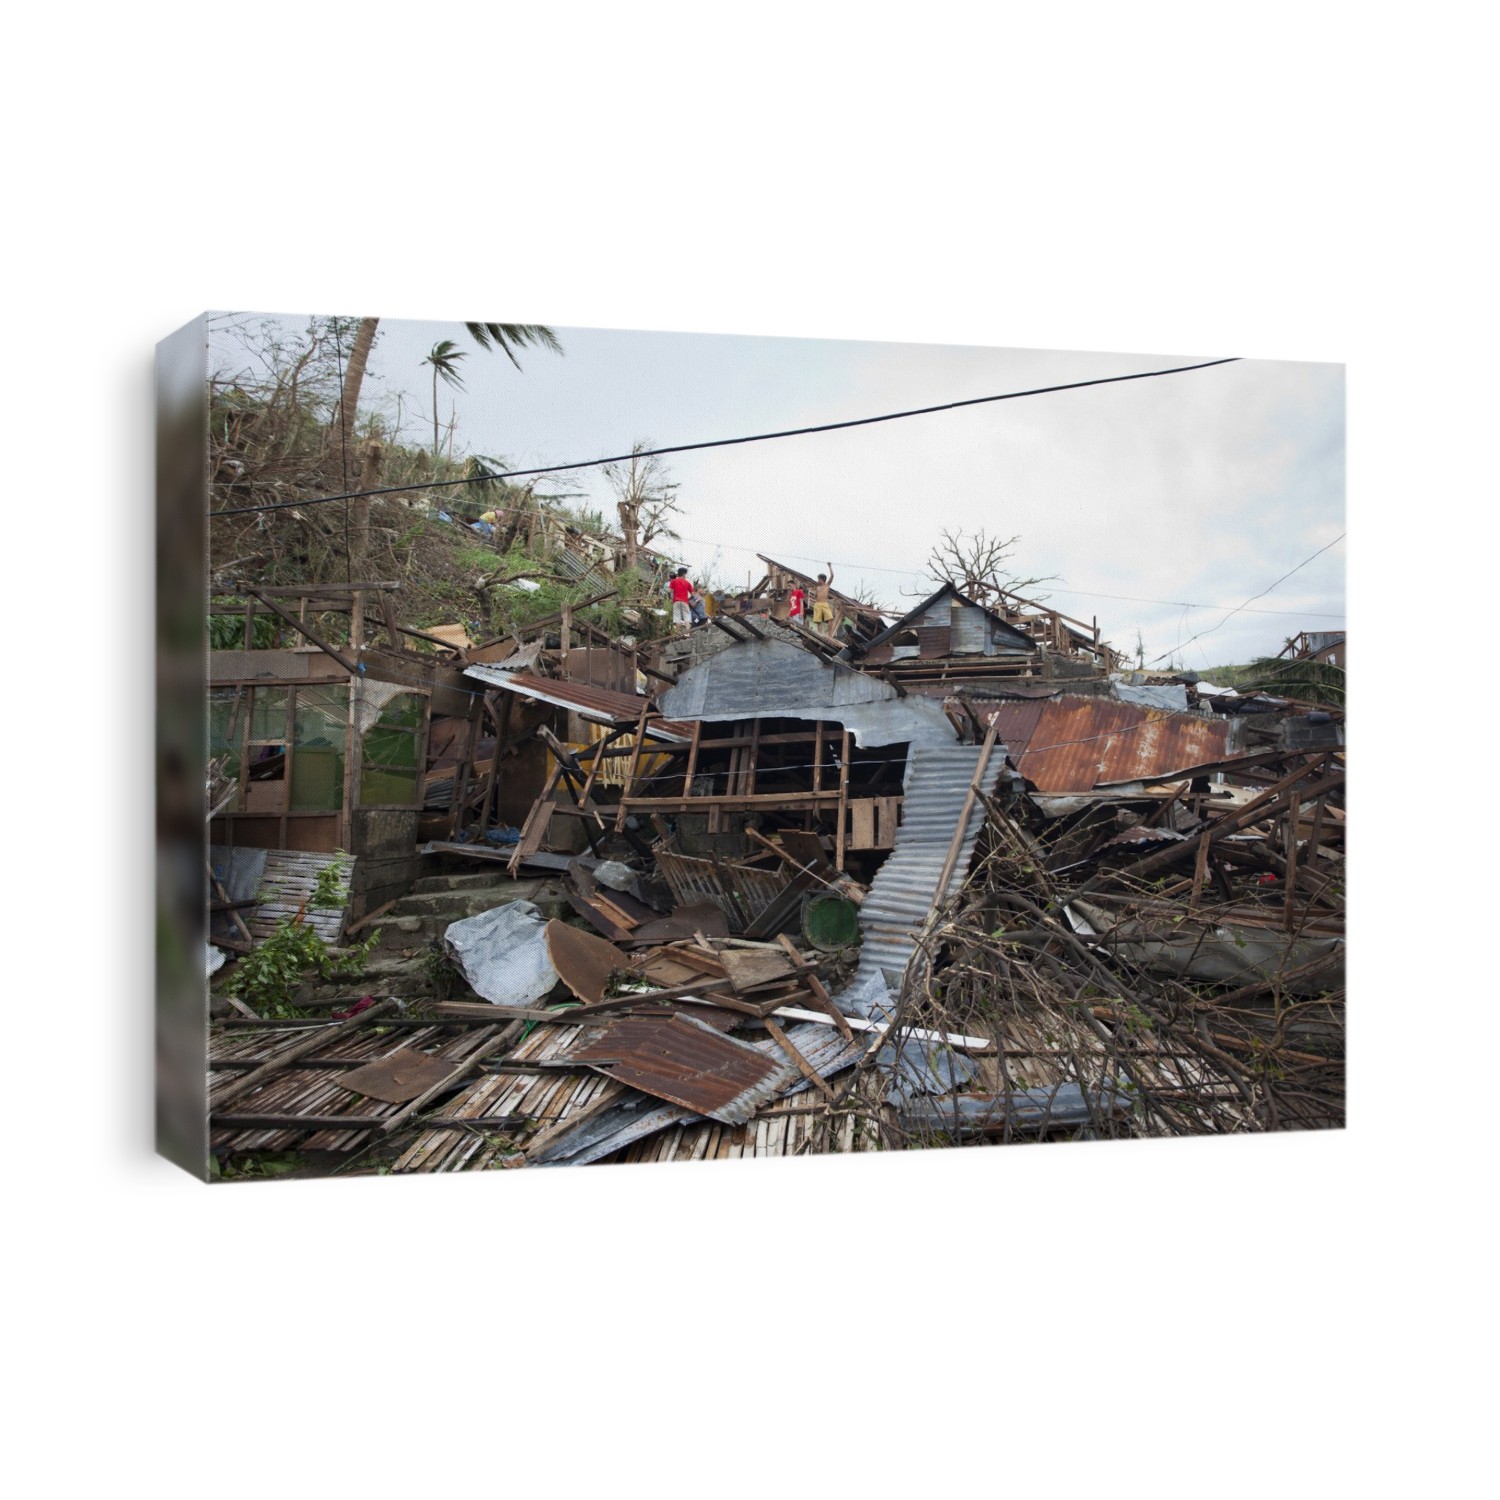 Destruction to a shanty town after super typhoon Haiyan. Haiyan was the strongest tropical cyclone ever recorded to have made landfall, with sustained winds of more than 300 kilometres per hour at its peak. The island of Leyte, and in particular its capital Tacloban, bore the brunt of Haiyan's force. More than 6200 people were confirmed killed, with nearly 2000 missing. Photographed in Tacloban, Leyte, in the Philippines, in November 2013.